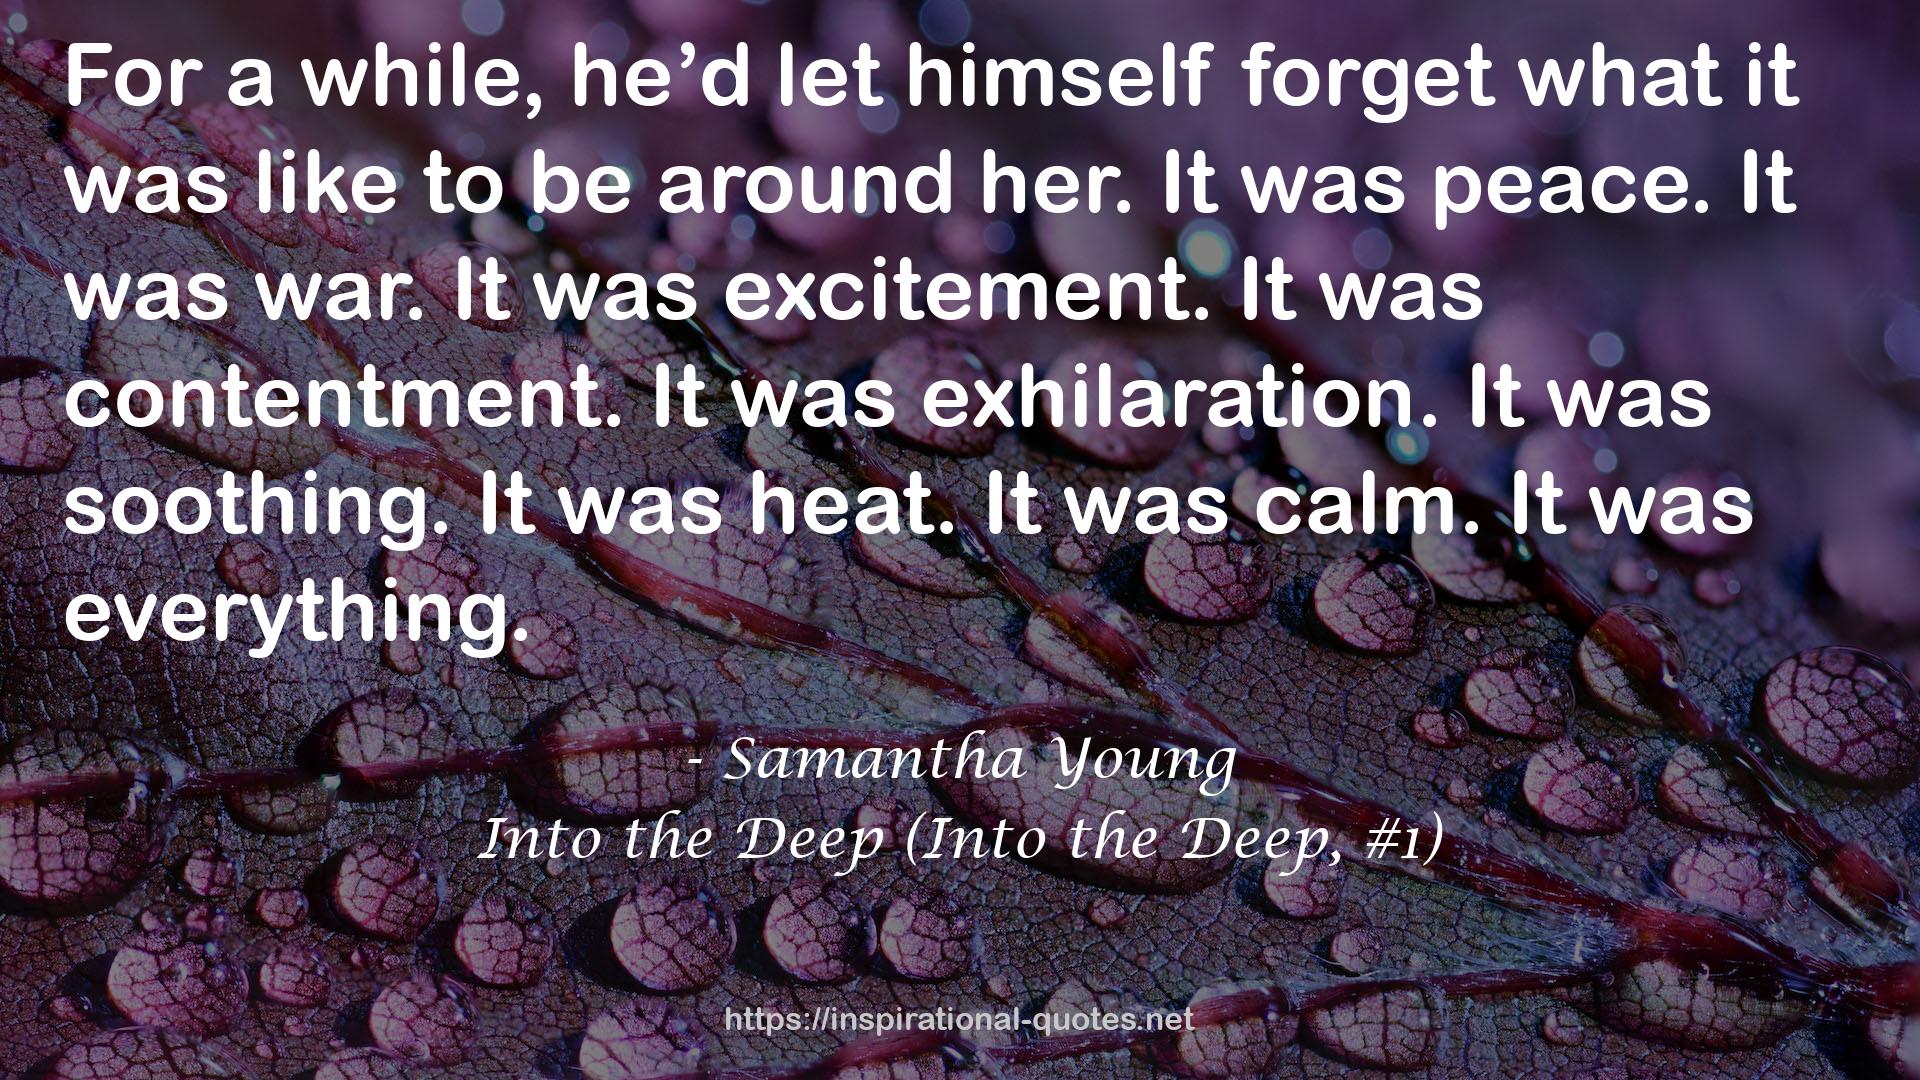 Into the Deep (Into the Deep, #1) QUOTES